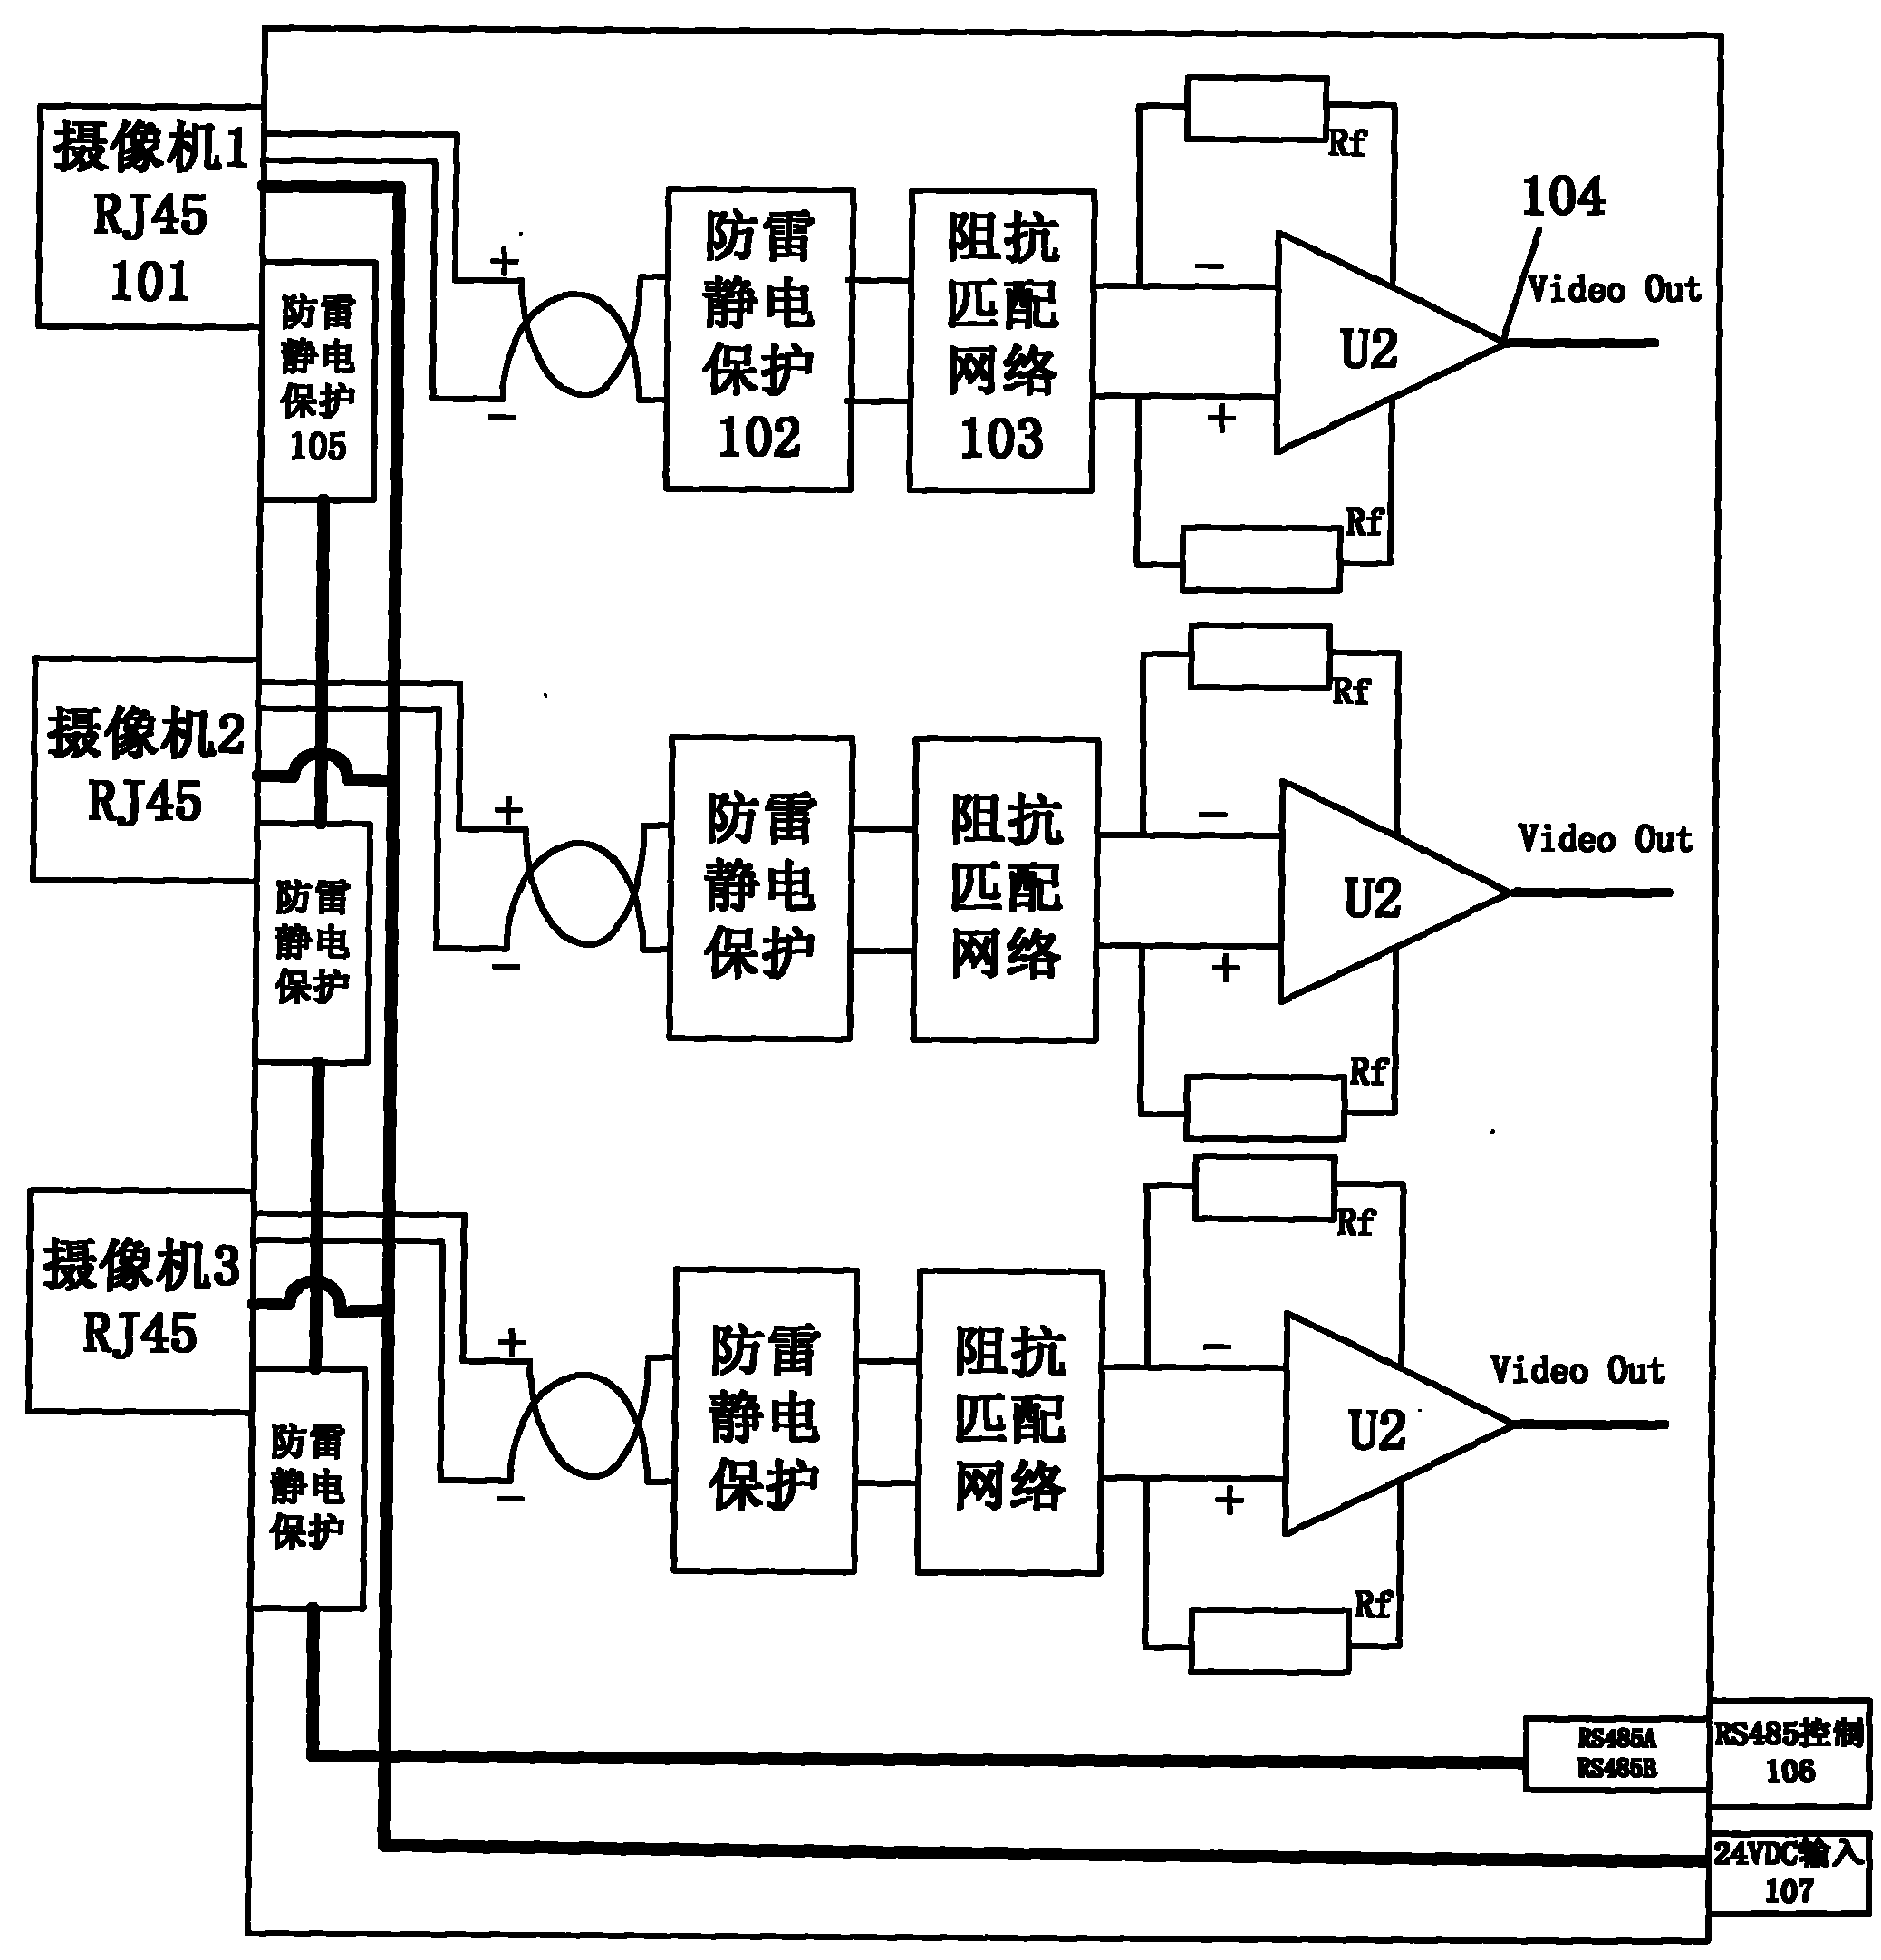 Monitoring device using net wire to transmit video signals, stabilized voltage and control signals